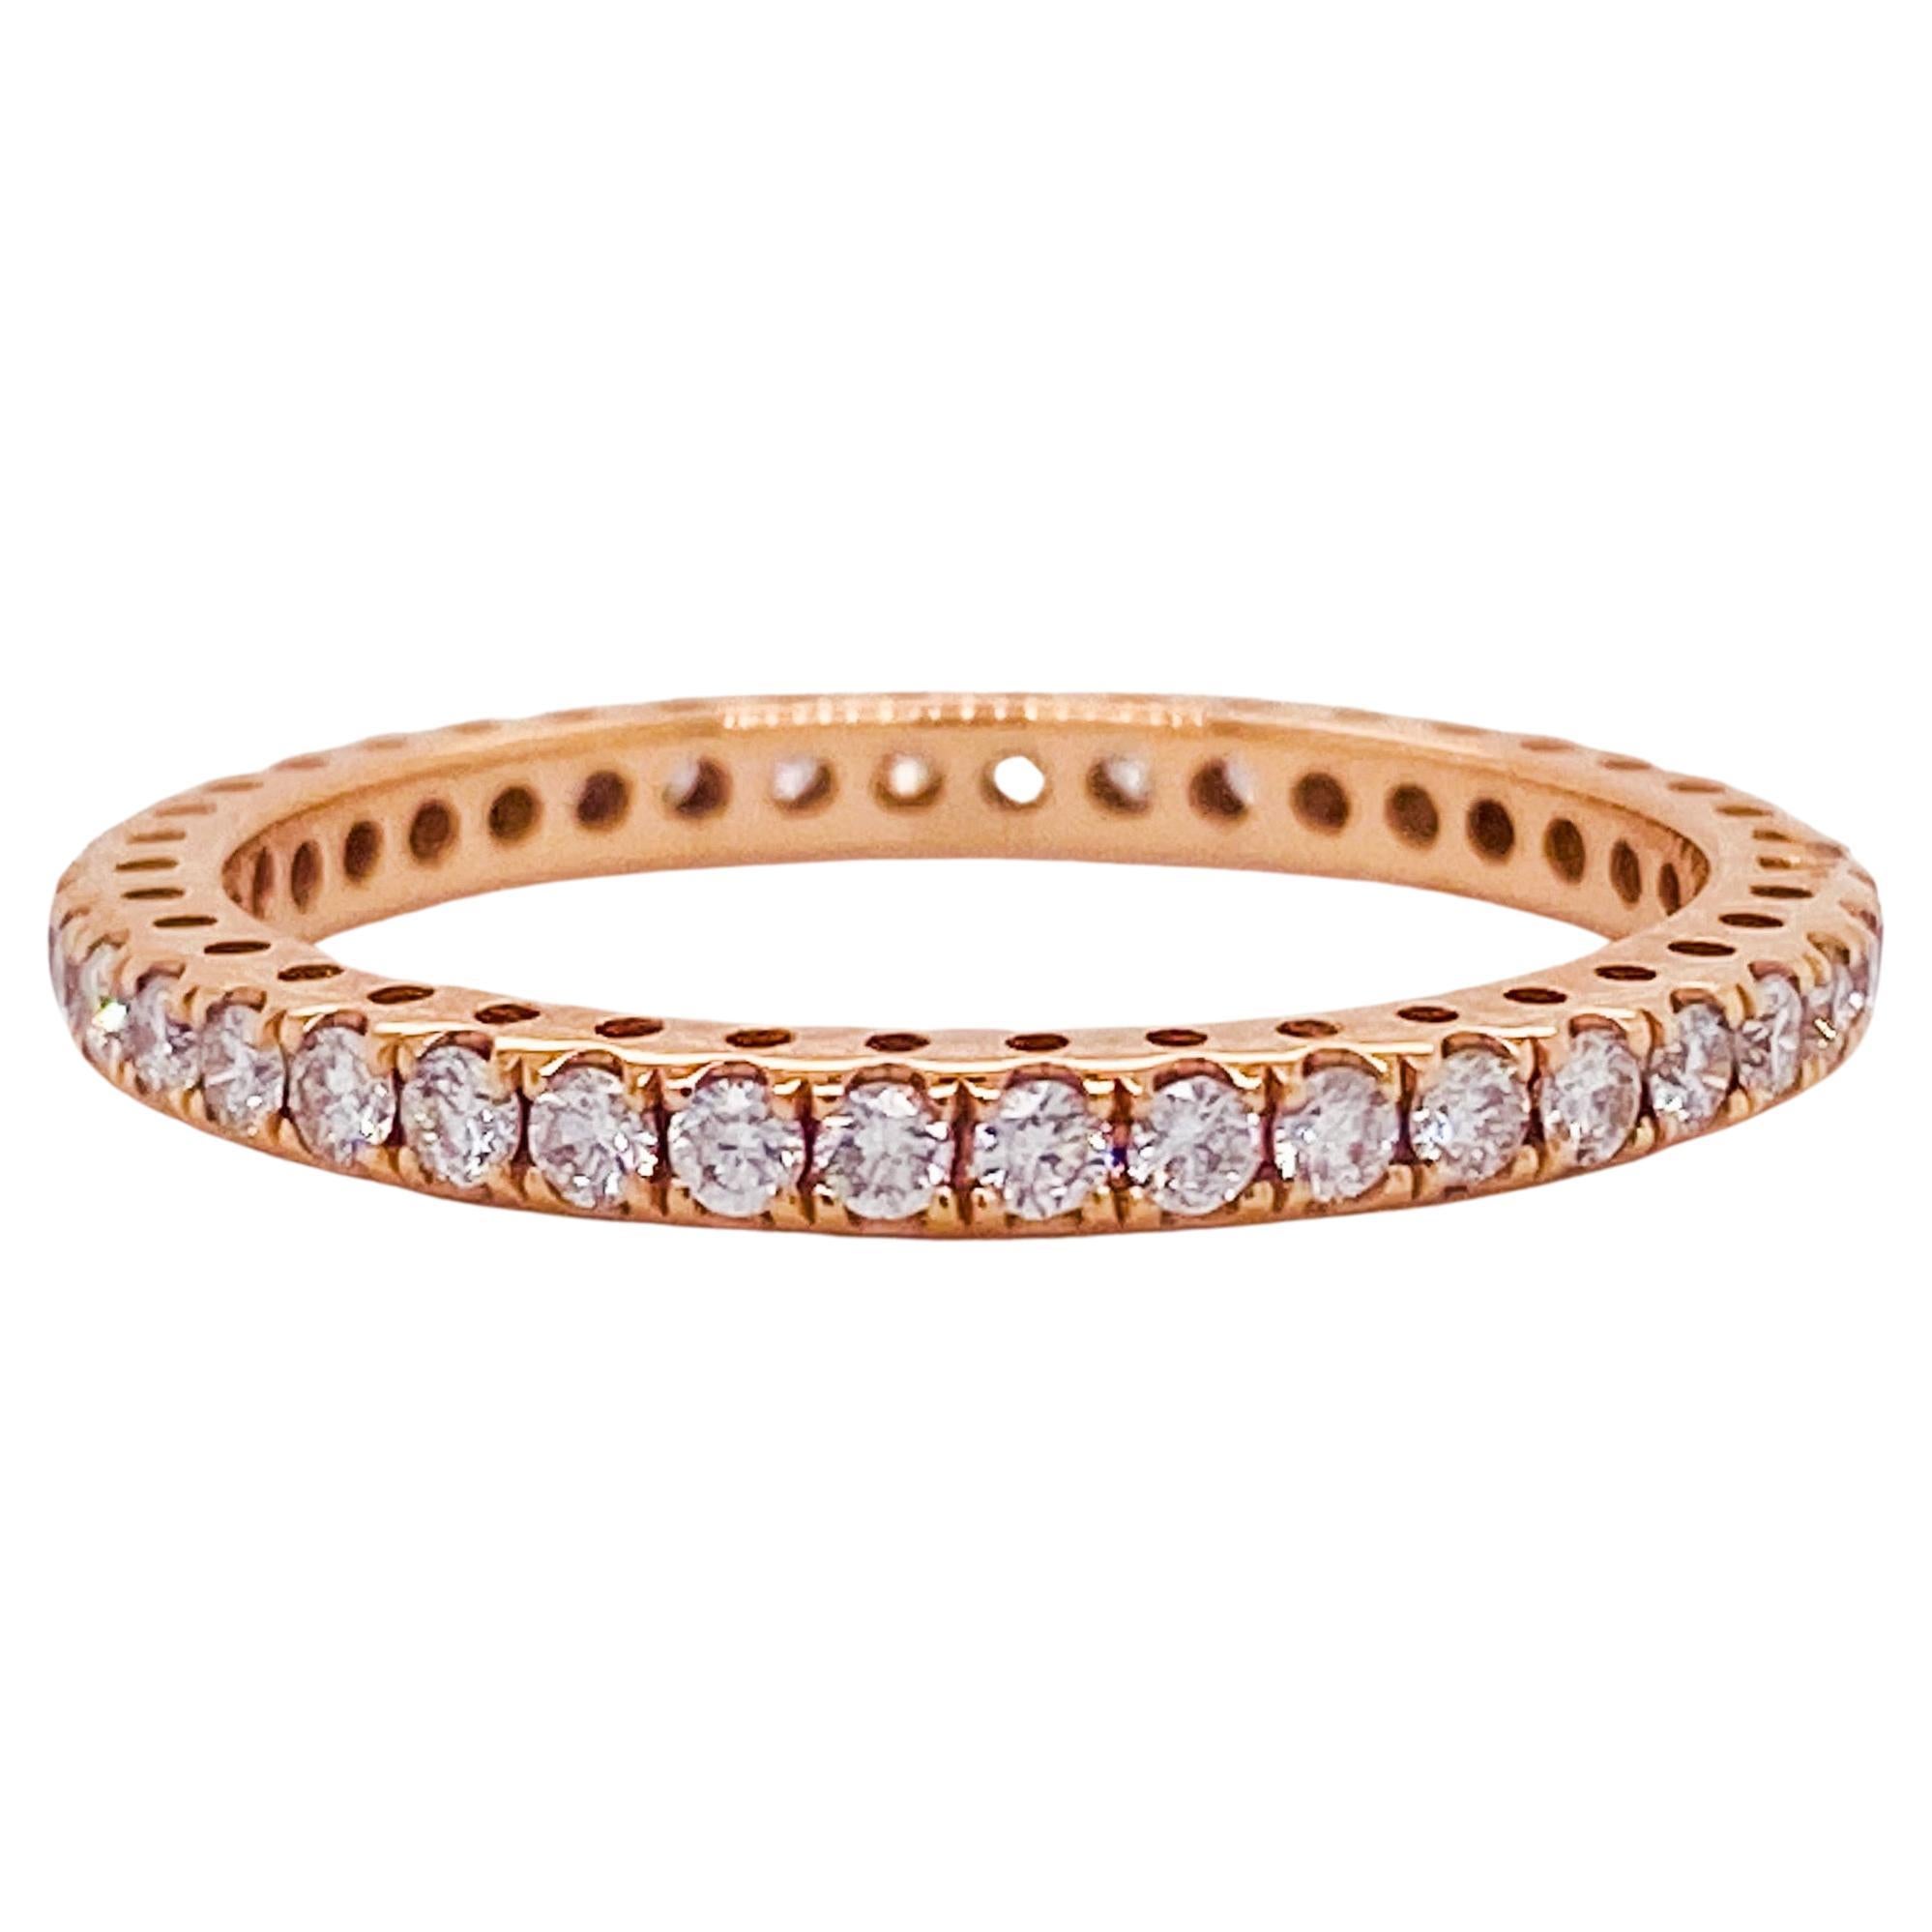 Diamond Eternity Band in 18k Rose Gold .54cttw Half Carat Stackable Ring